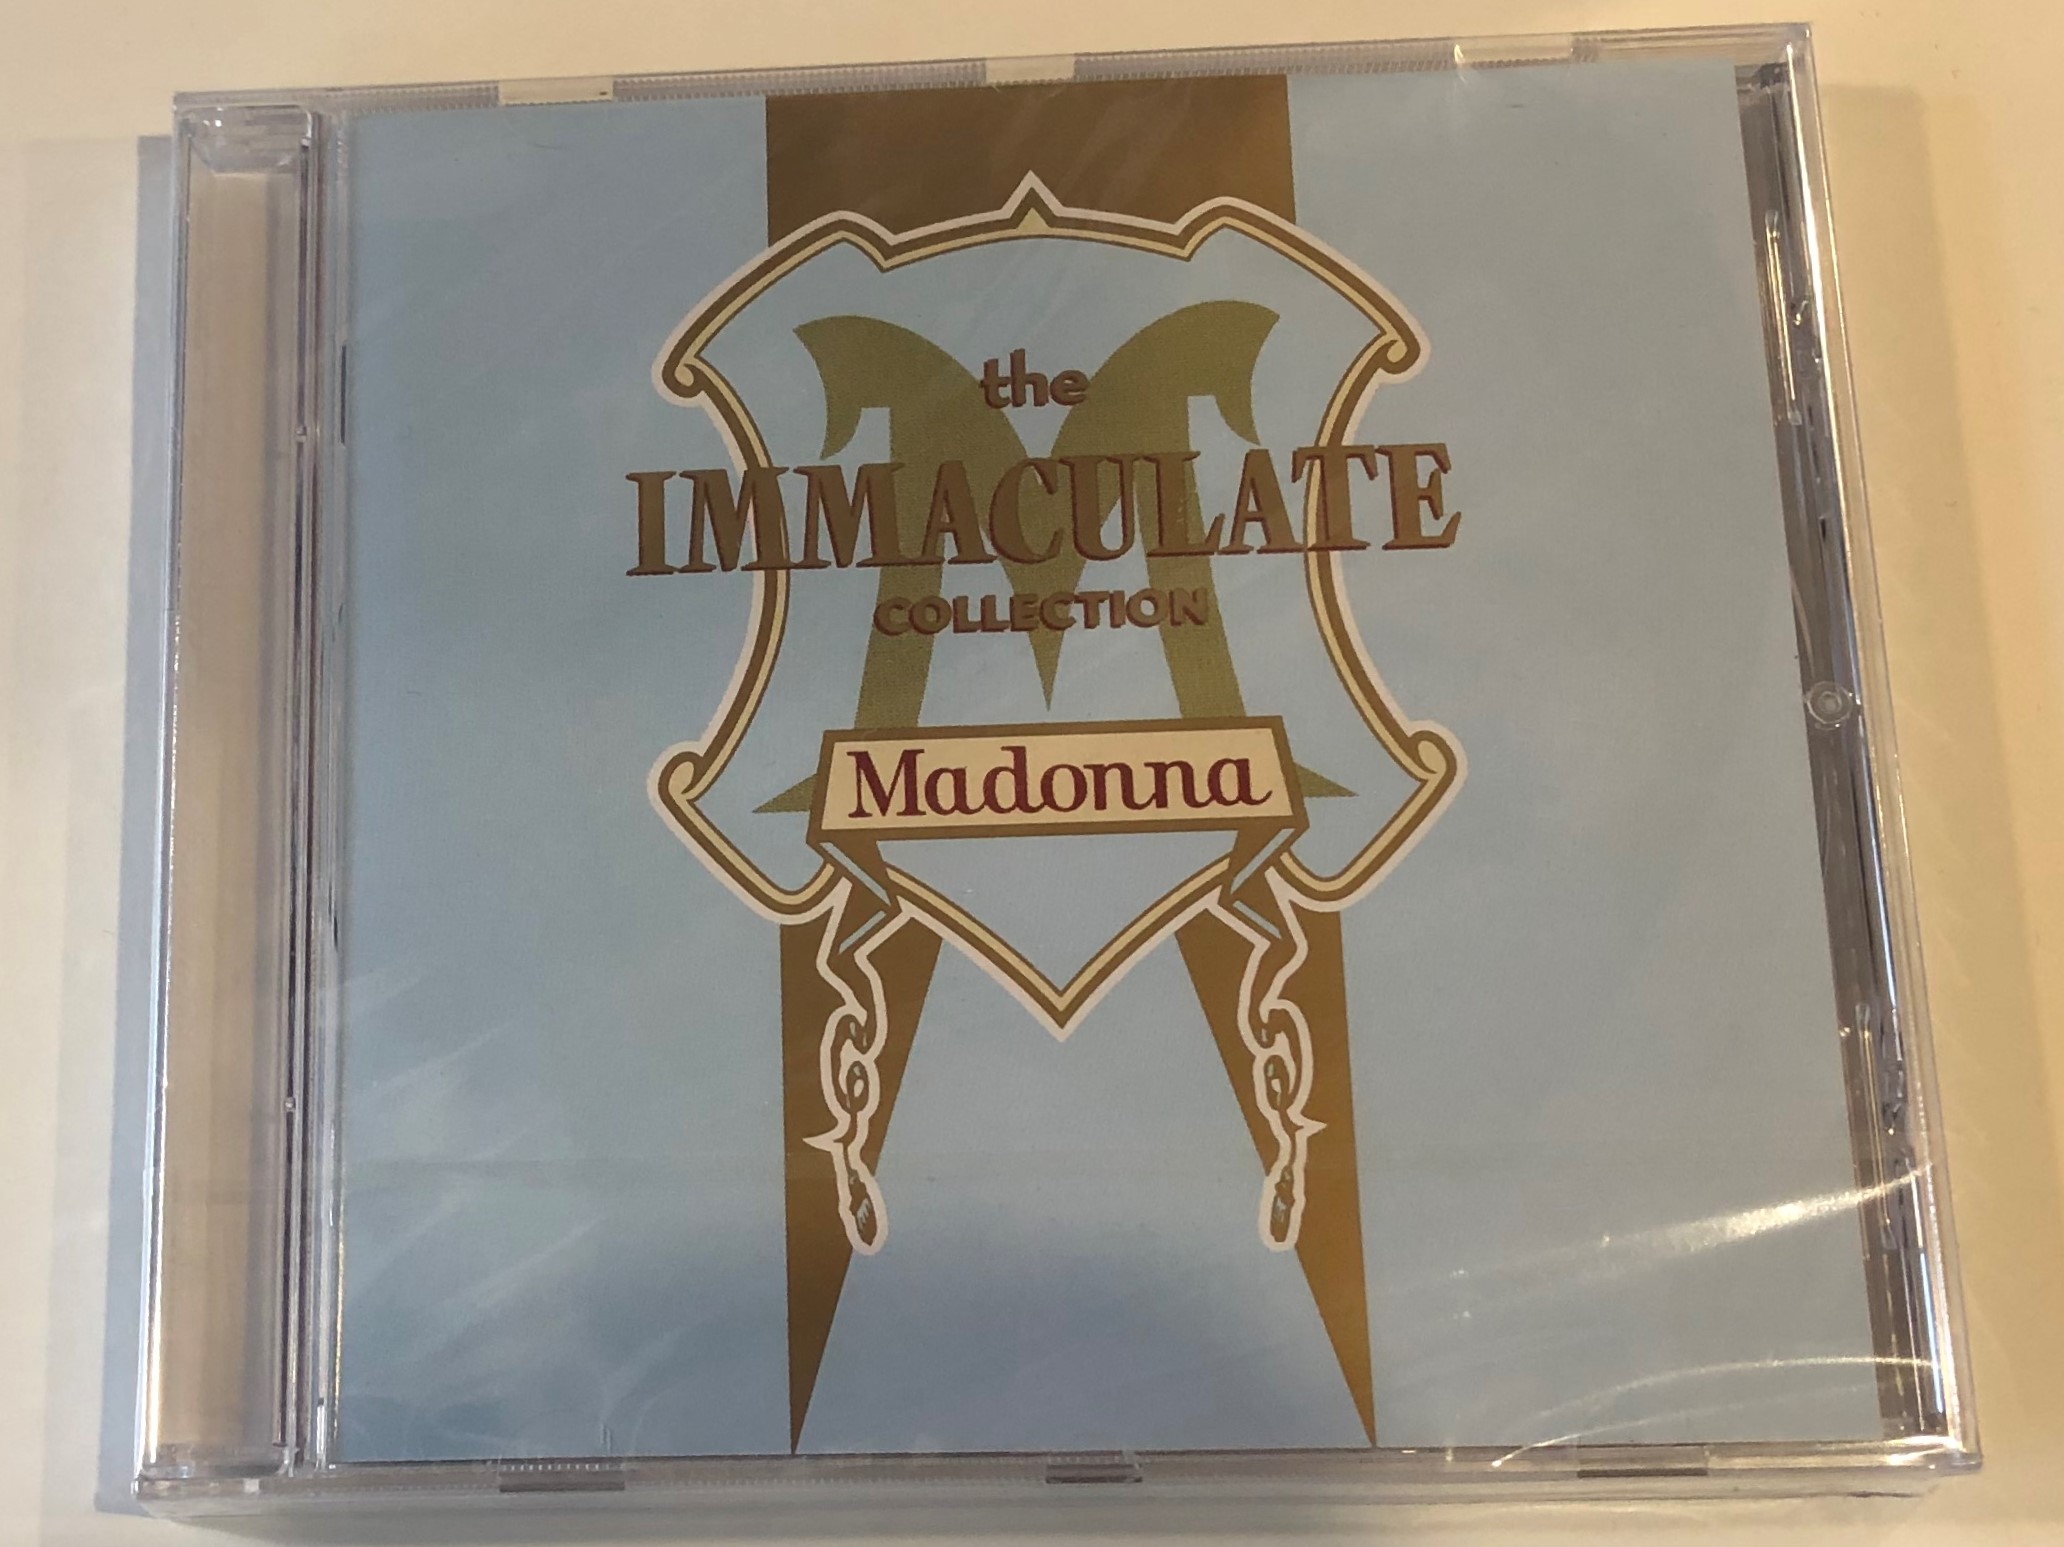 the-immaculate-collection-madonna-warner-bros.-records-audio-cd-7599-26440-2-1-.jpg